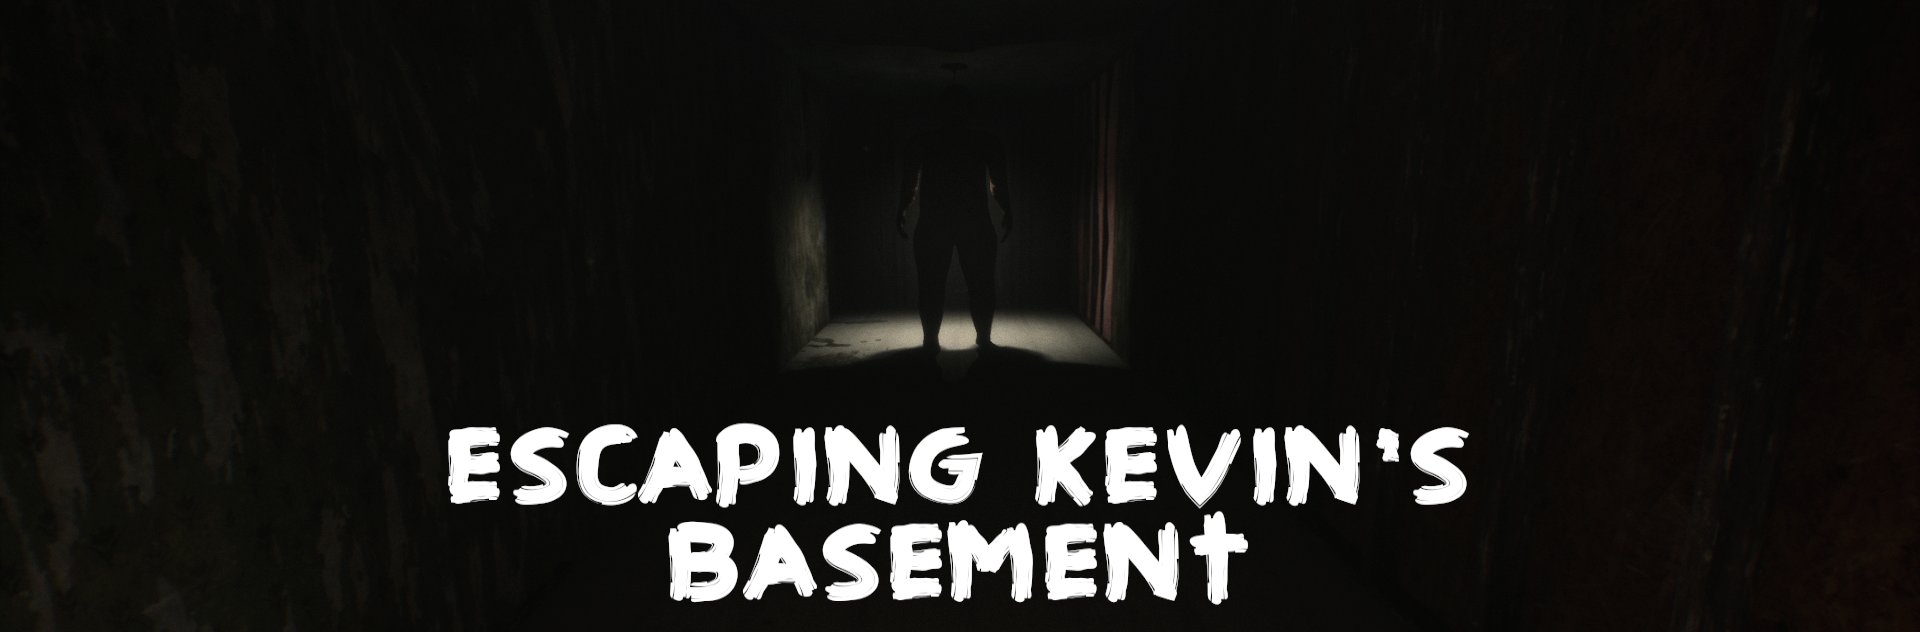 Escaping Kevin's Basement